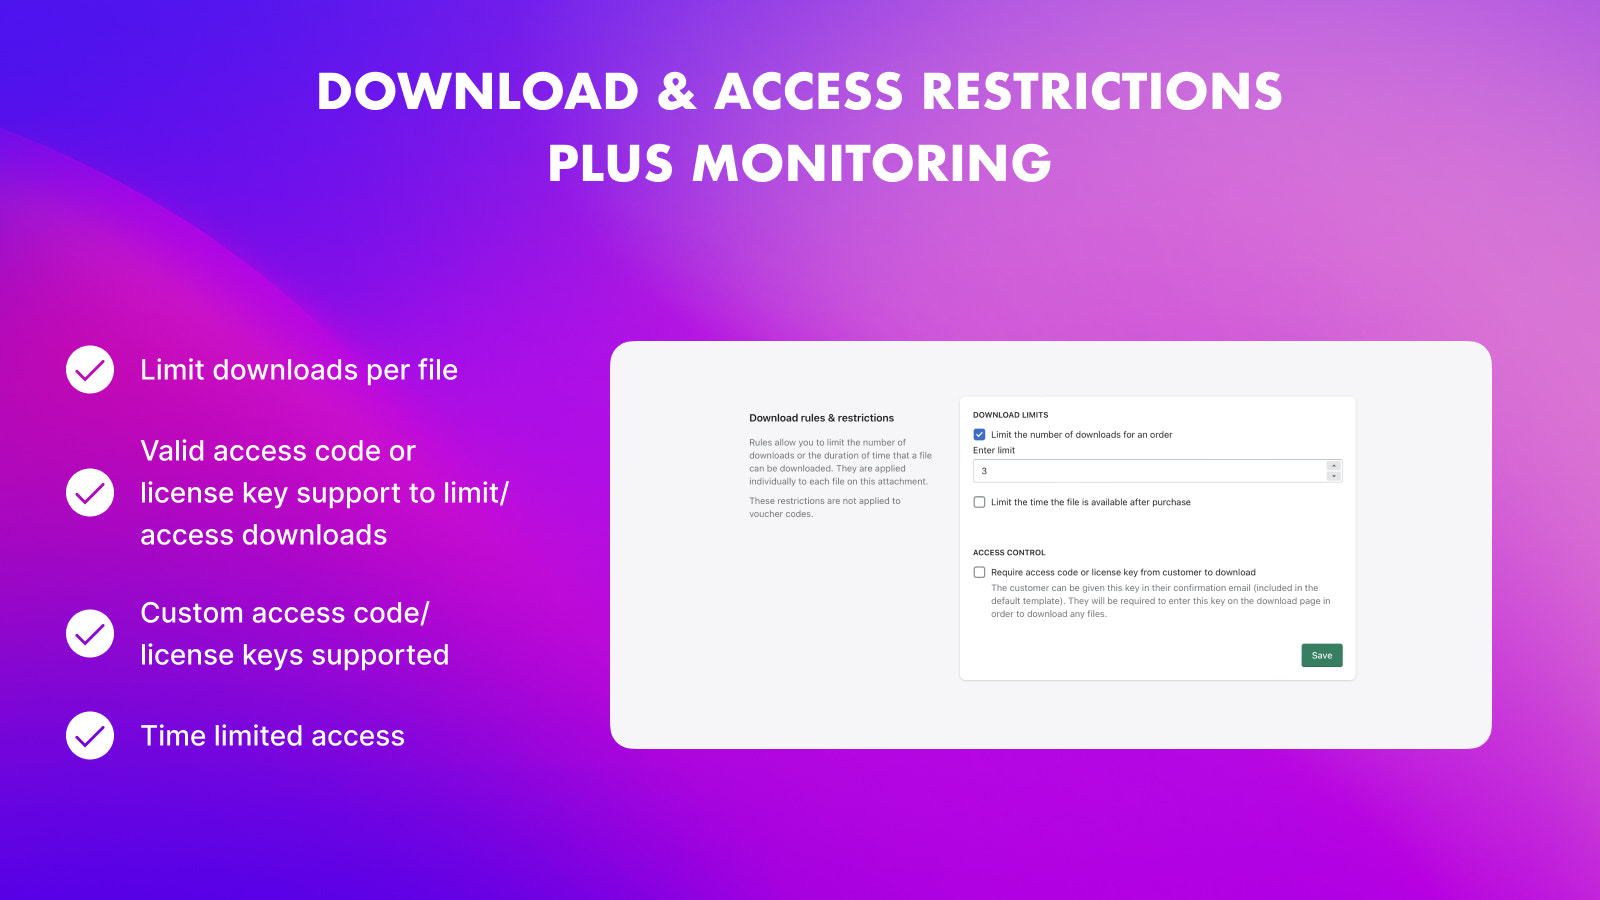 Download & access restrictions plus monitoring